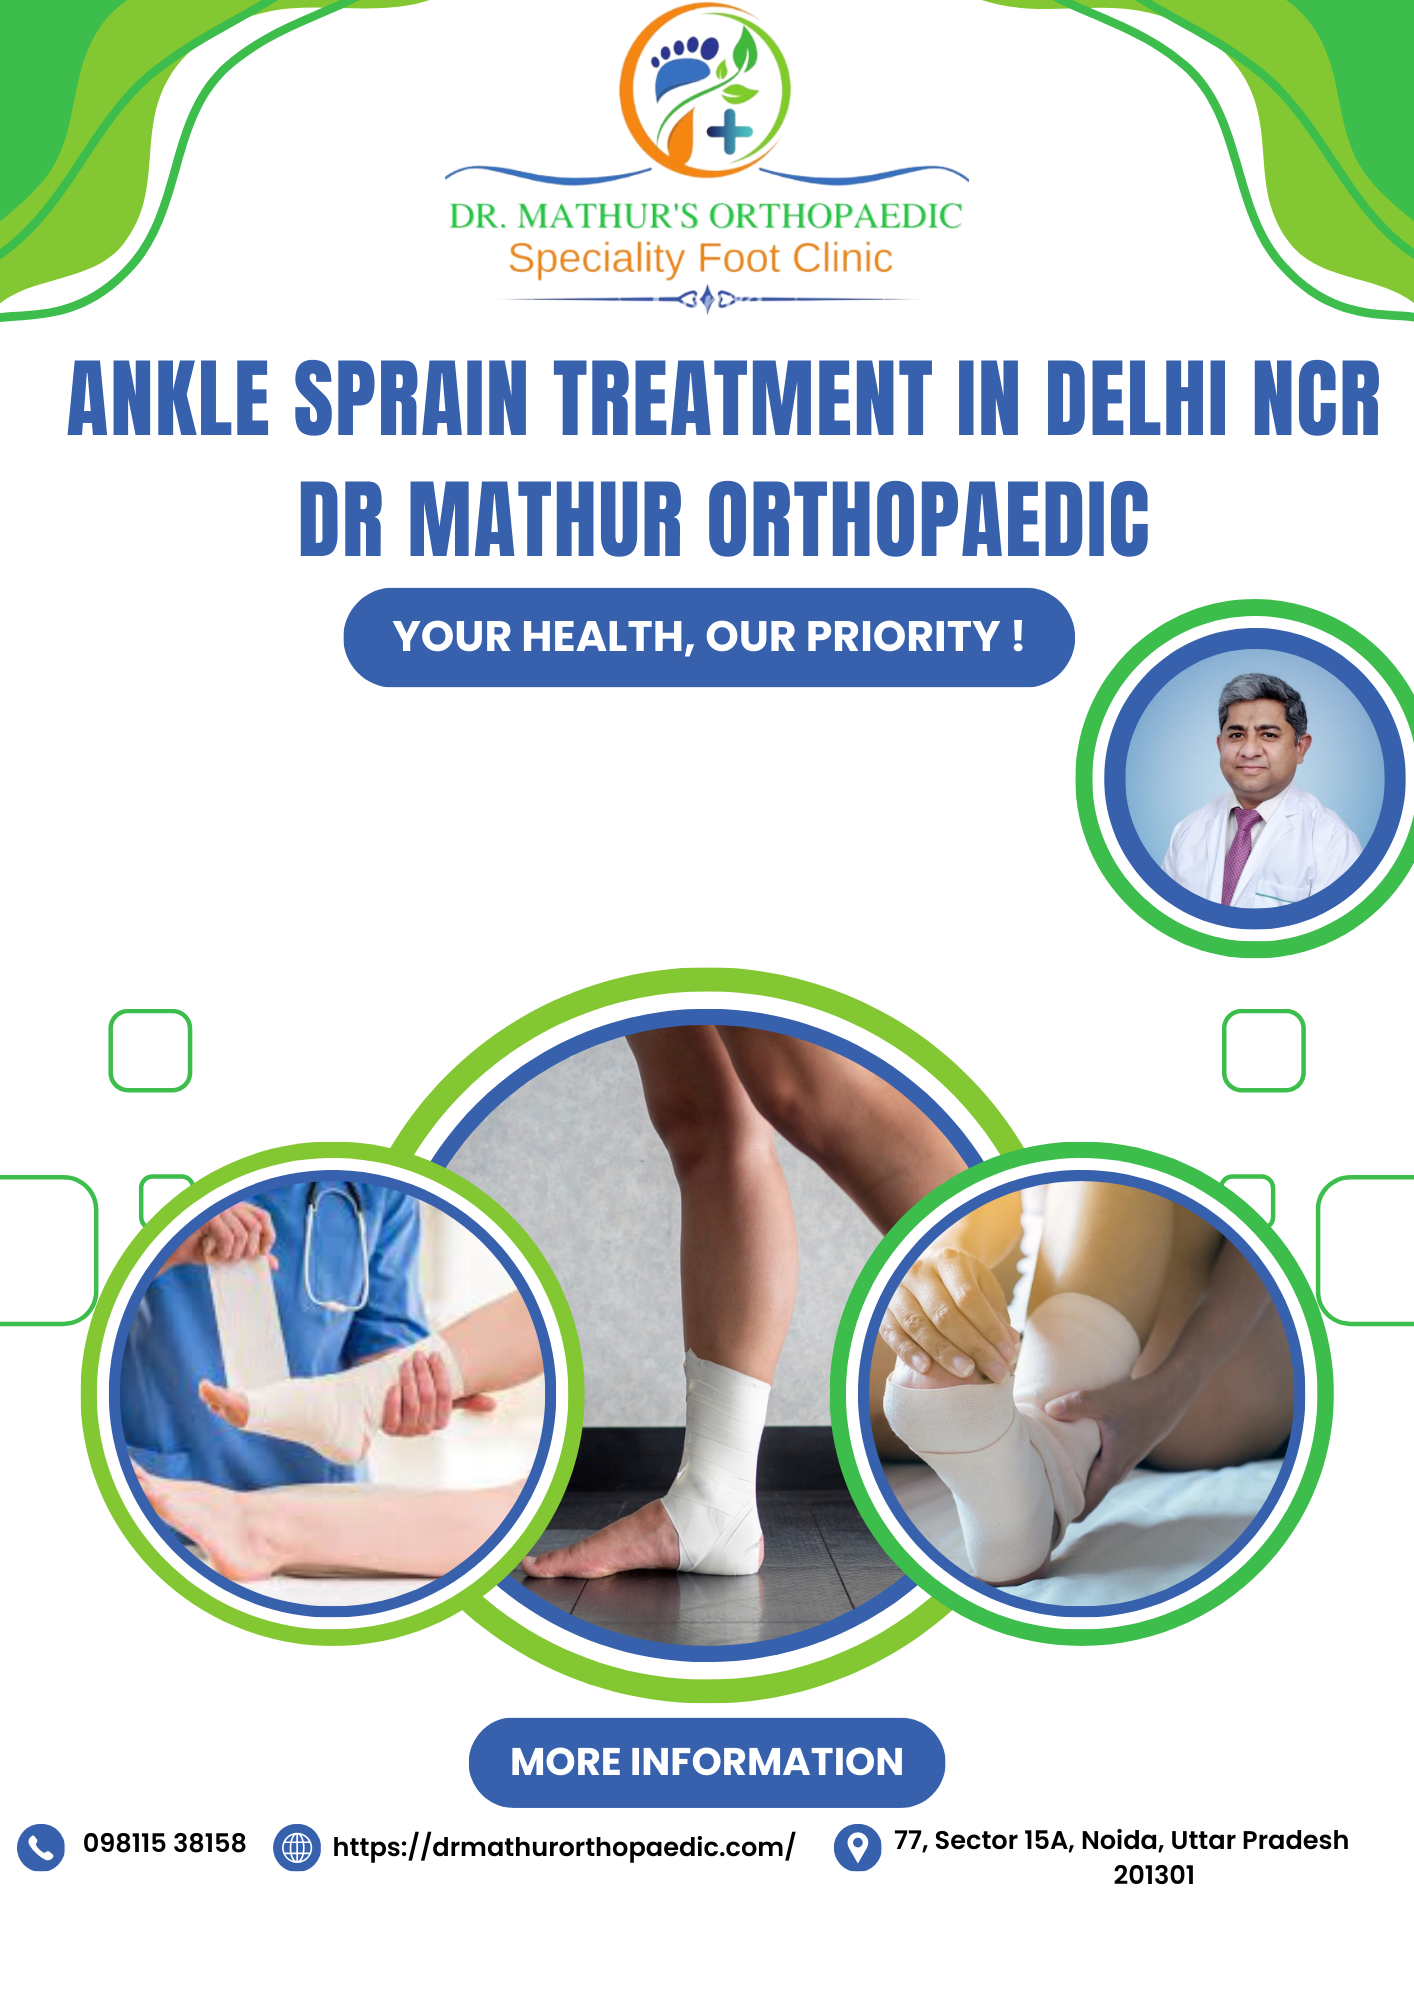 Swift Recovery Starts Here: Ankle Sprain Treatment in Delhi NCR by Dr. Mathur Orthopaedic – Site Title